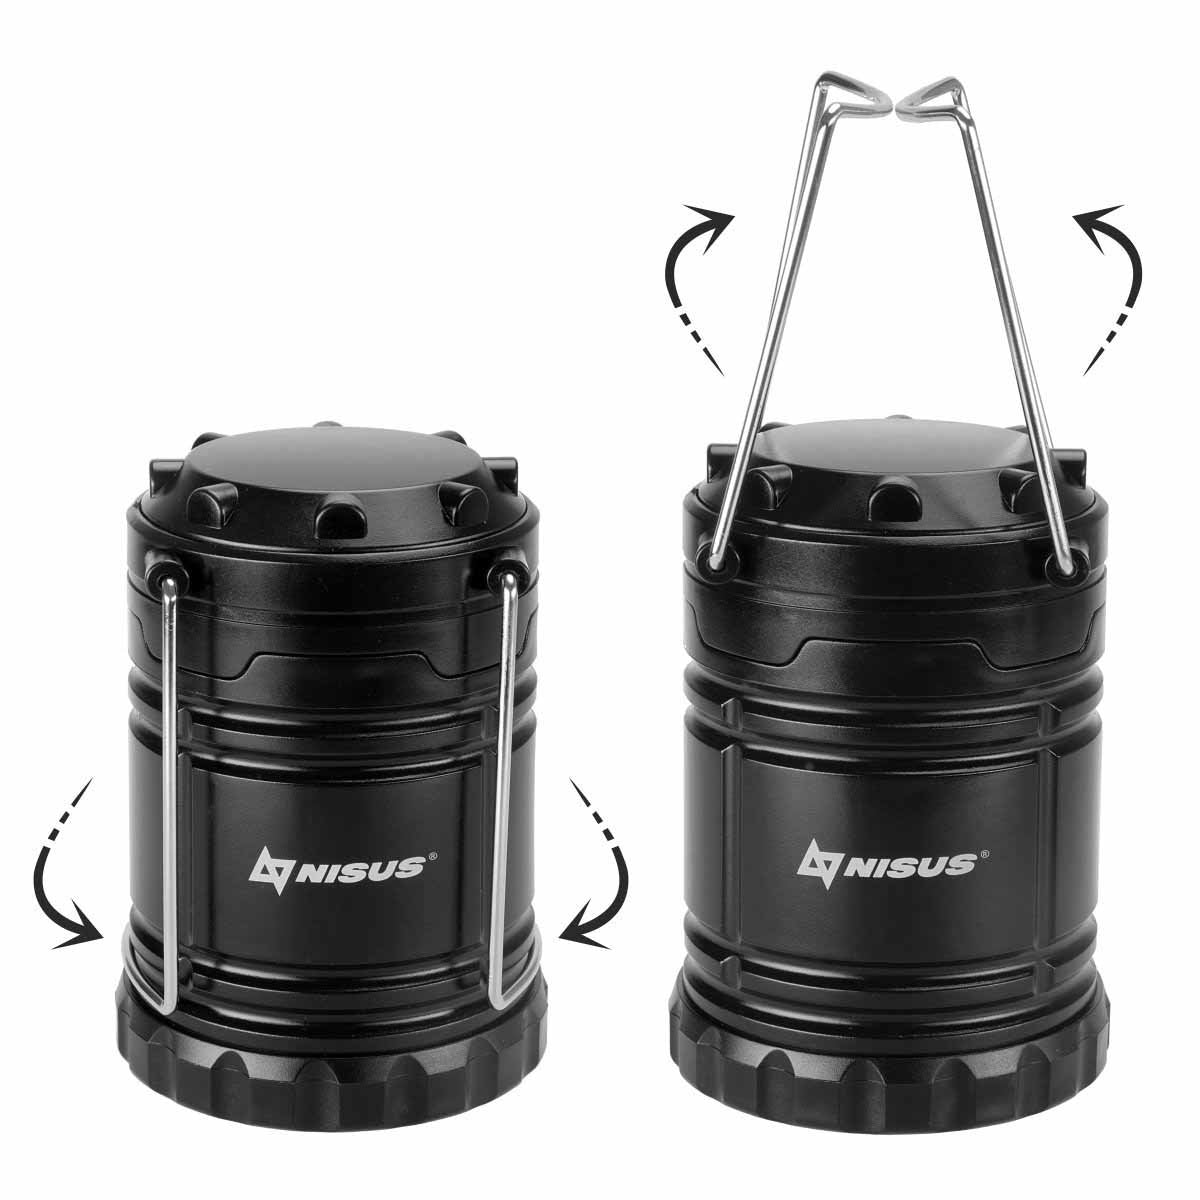 Collapsible LED Camping Lantern, IPX4 Waterproof